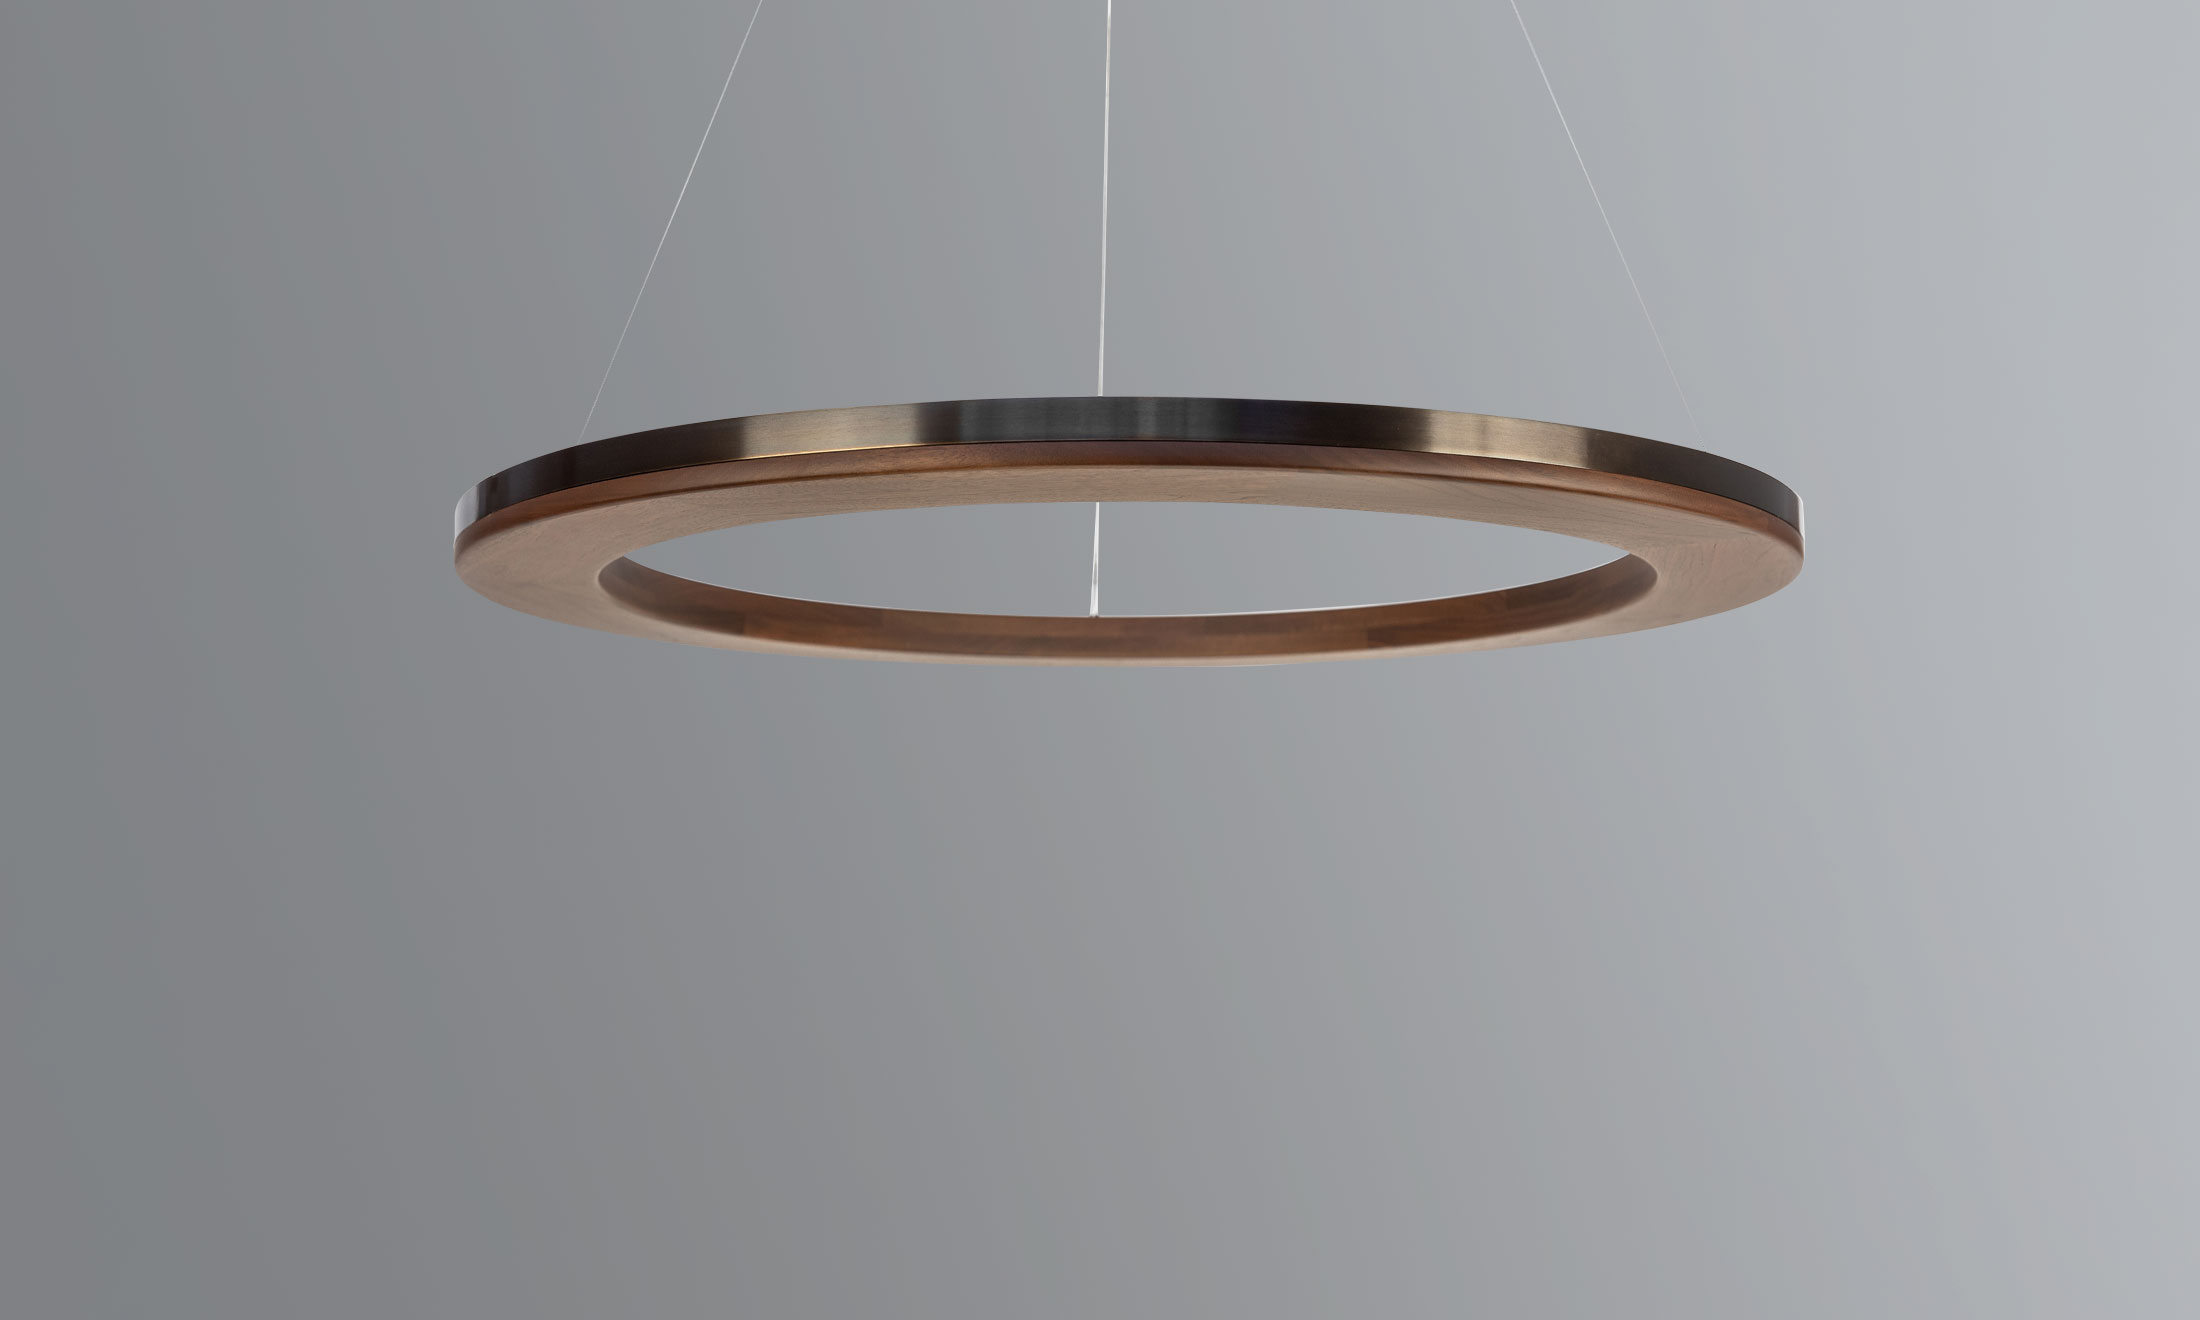 Made of walnut with a smooth metal inlay, Boyd Lighting's Numi is as contemporary as it is refined. Designed with integrated LED uplighting, this chandelier will provide gentle glowing illumination to any space